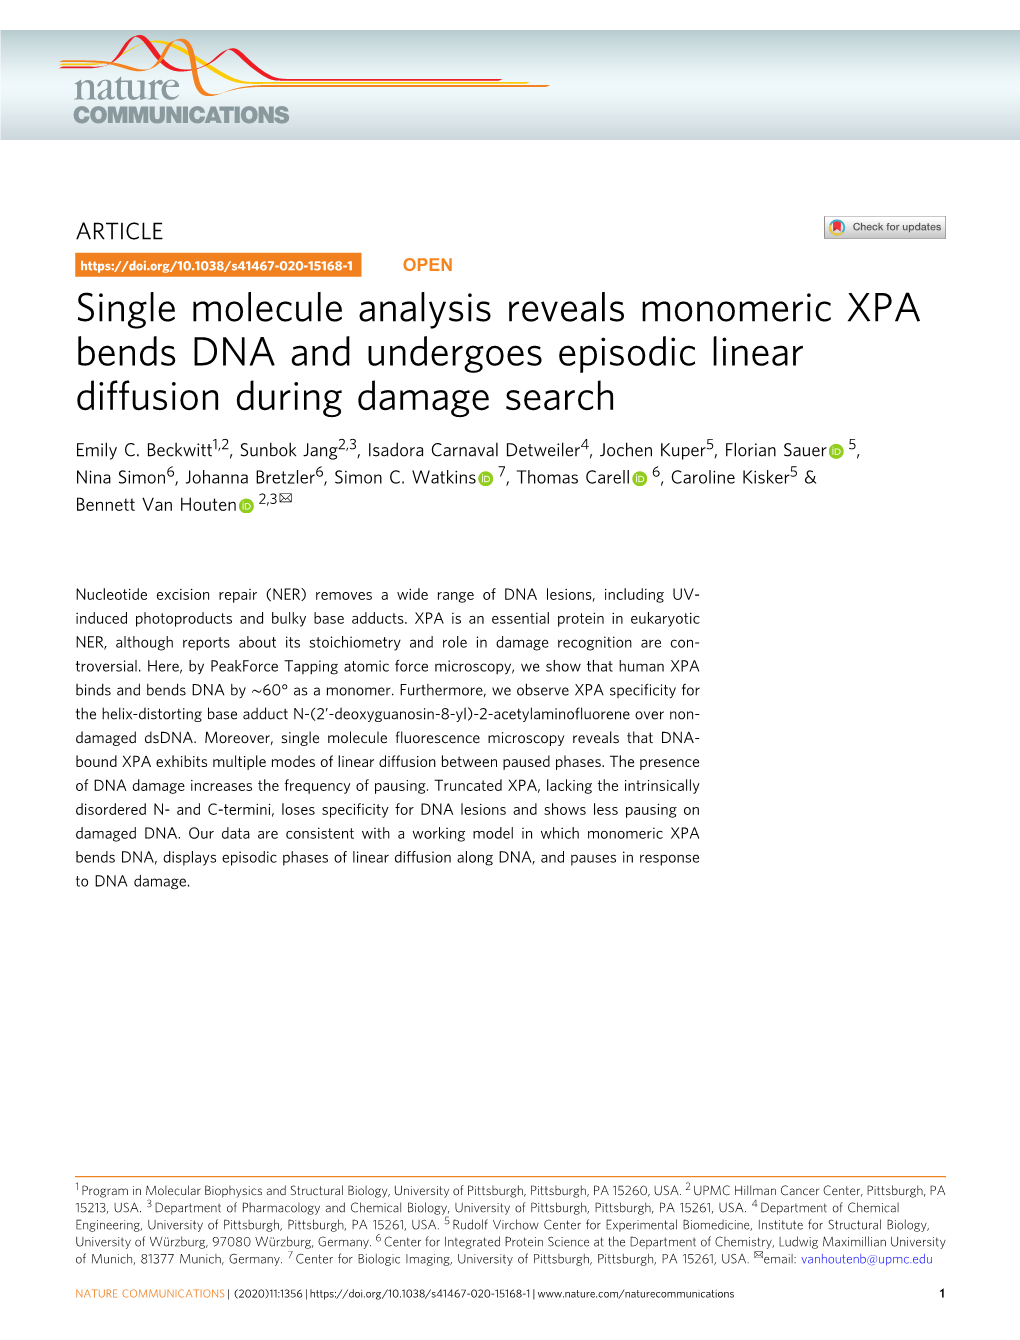 Single Molecule Analysis Reveals Monomeric XPA Bends DNA and Undergoes Episodic Linear Diffusion During Damage Search